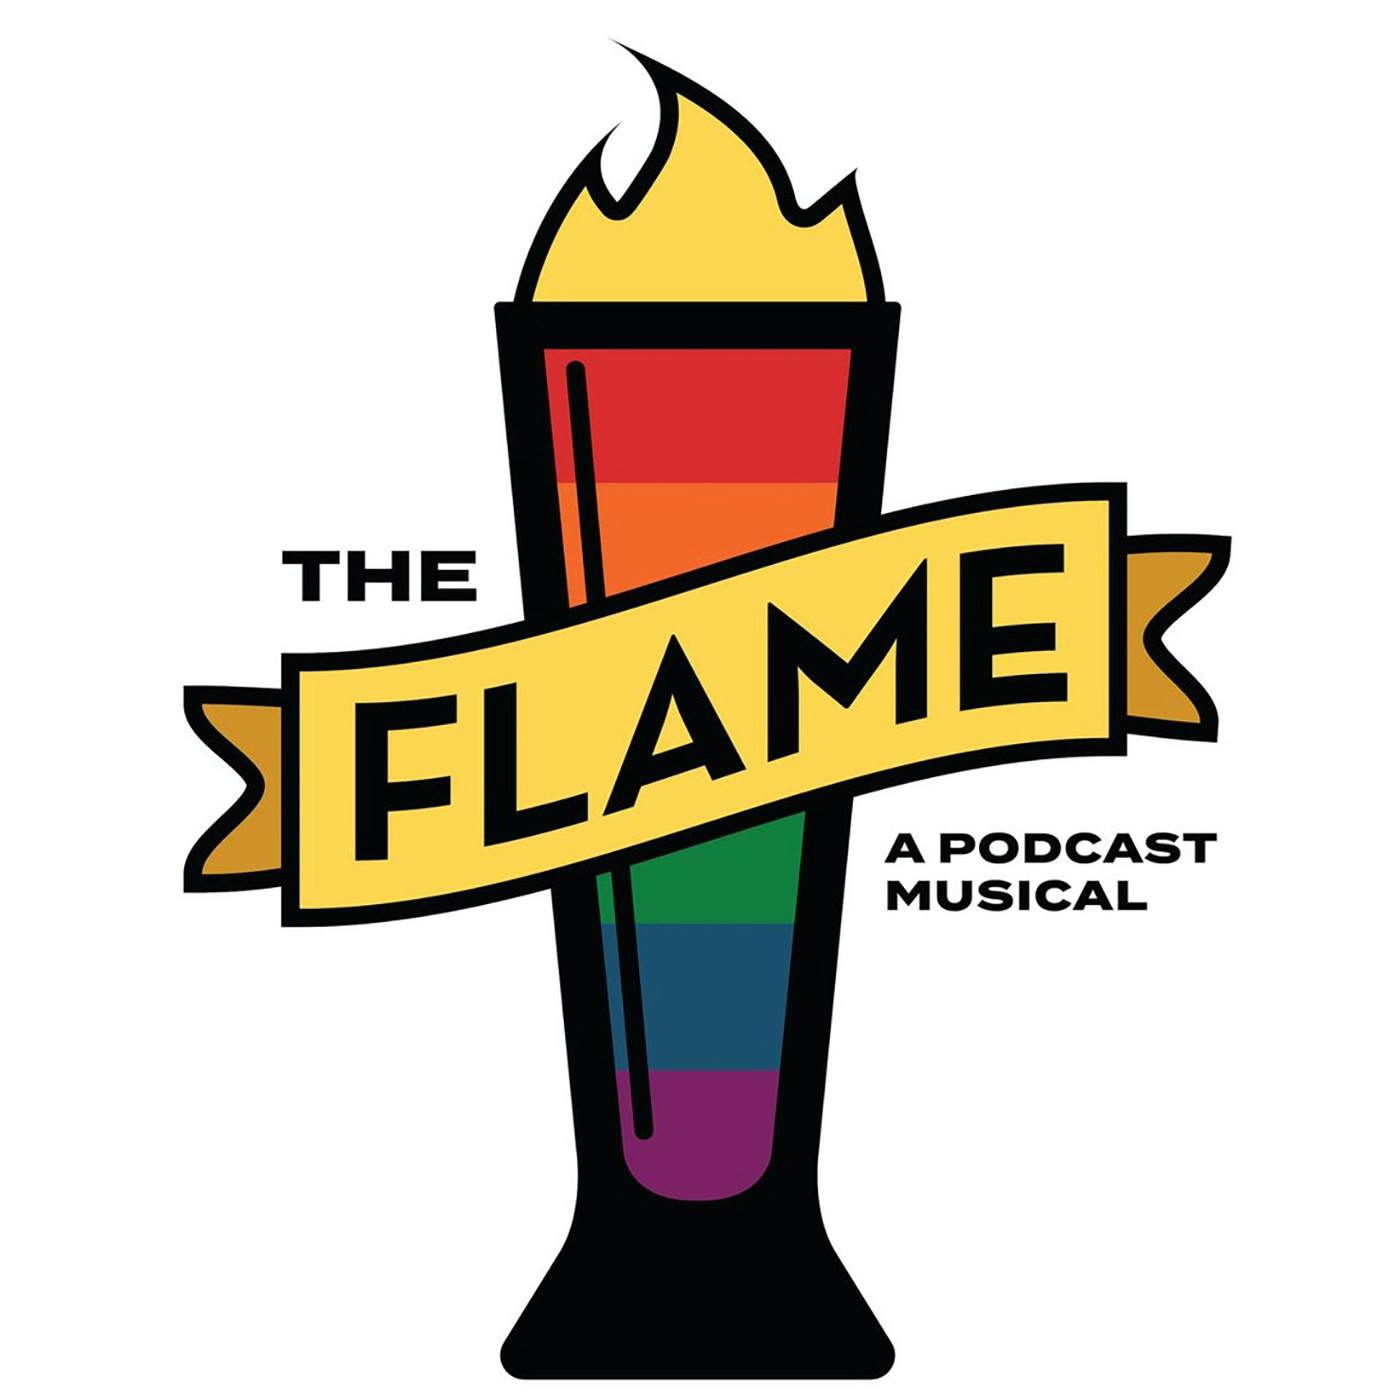 The Flame - A Podcast Musical